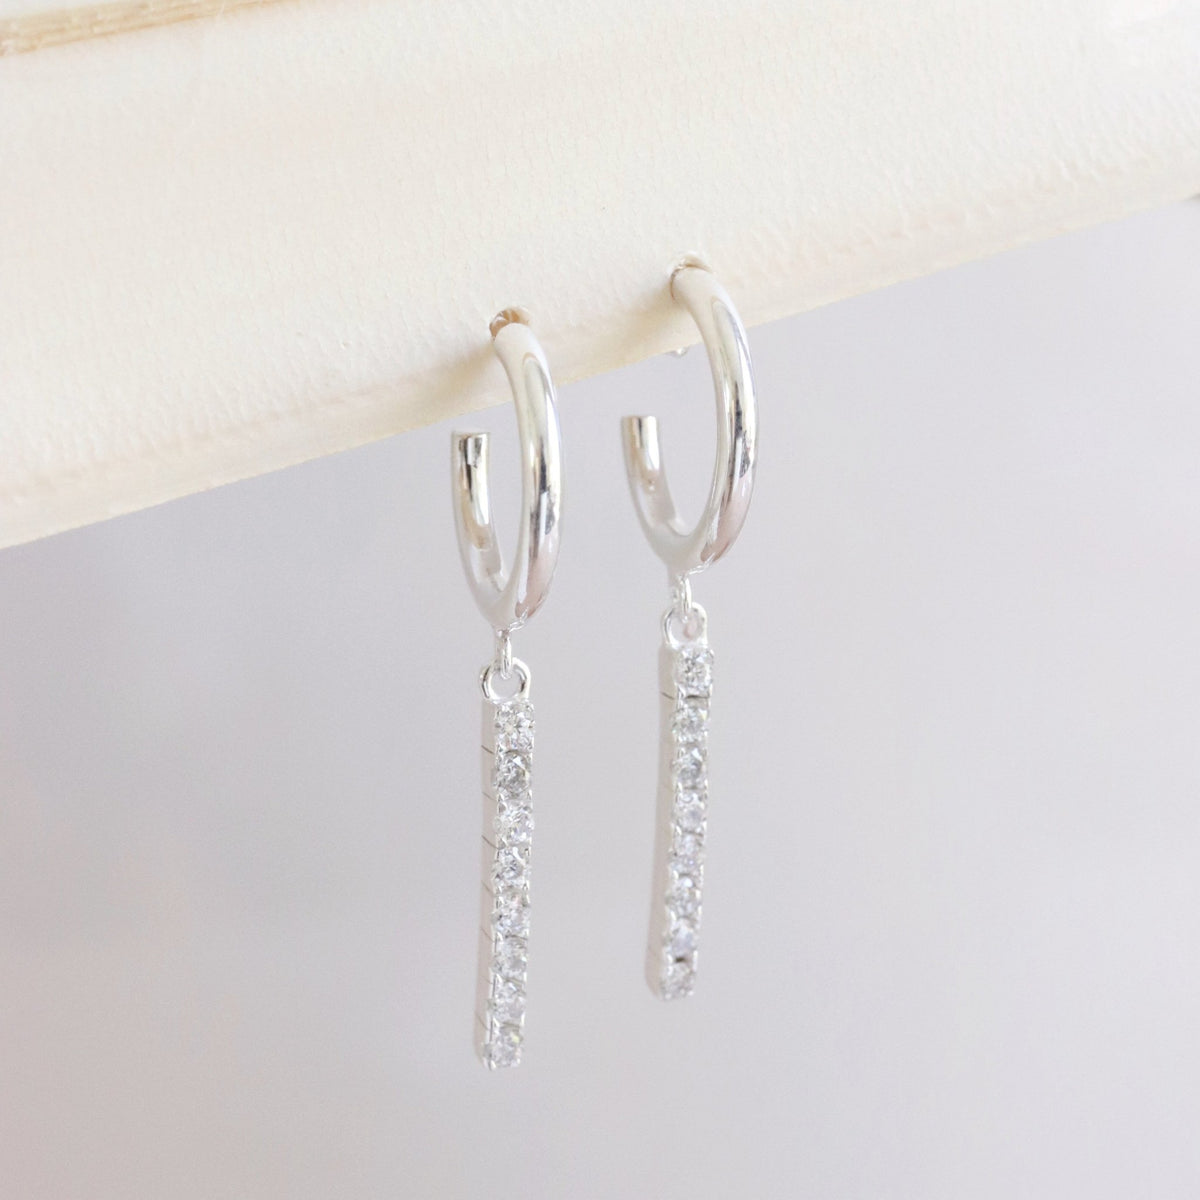 LOVE TENNIS HOOPS - CUBIC ZIRCONIA &amp; SILVER - SO PRETTY CARA COTTER